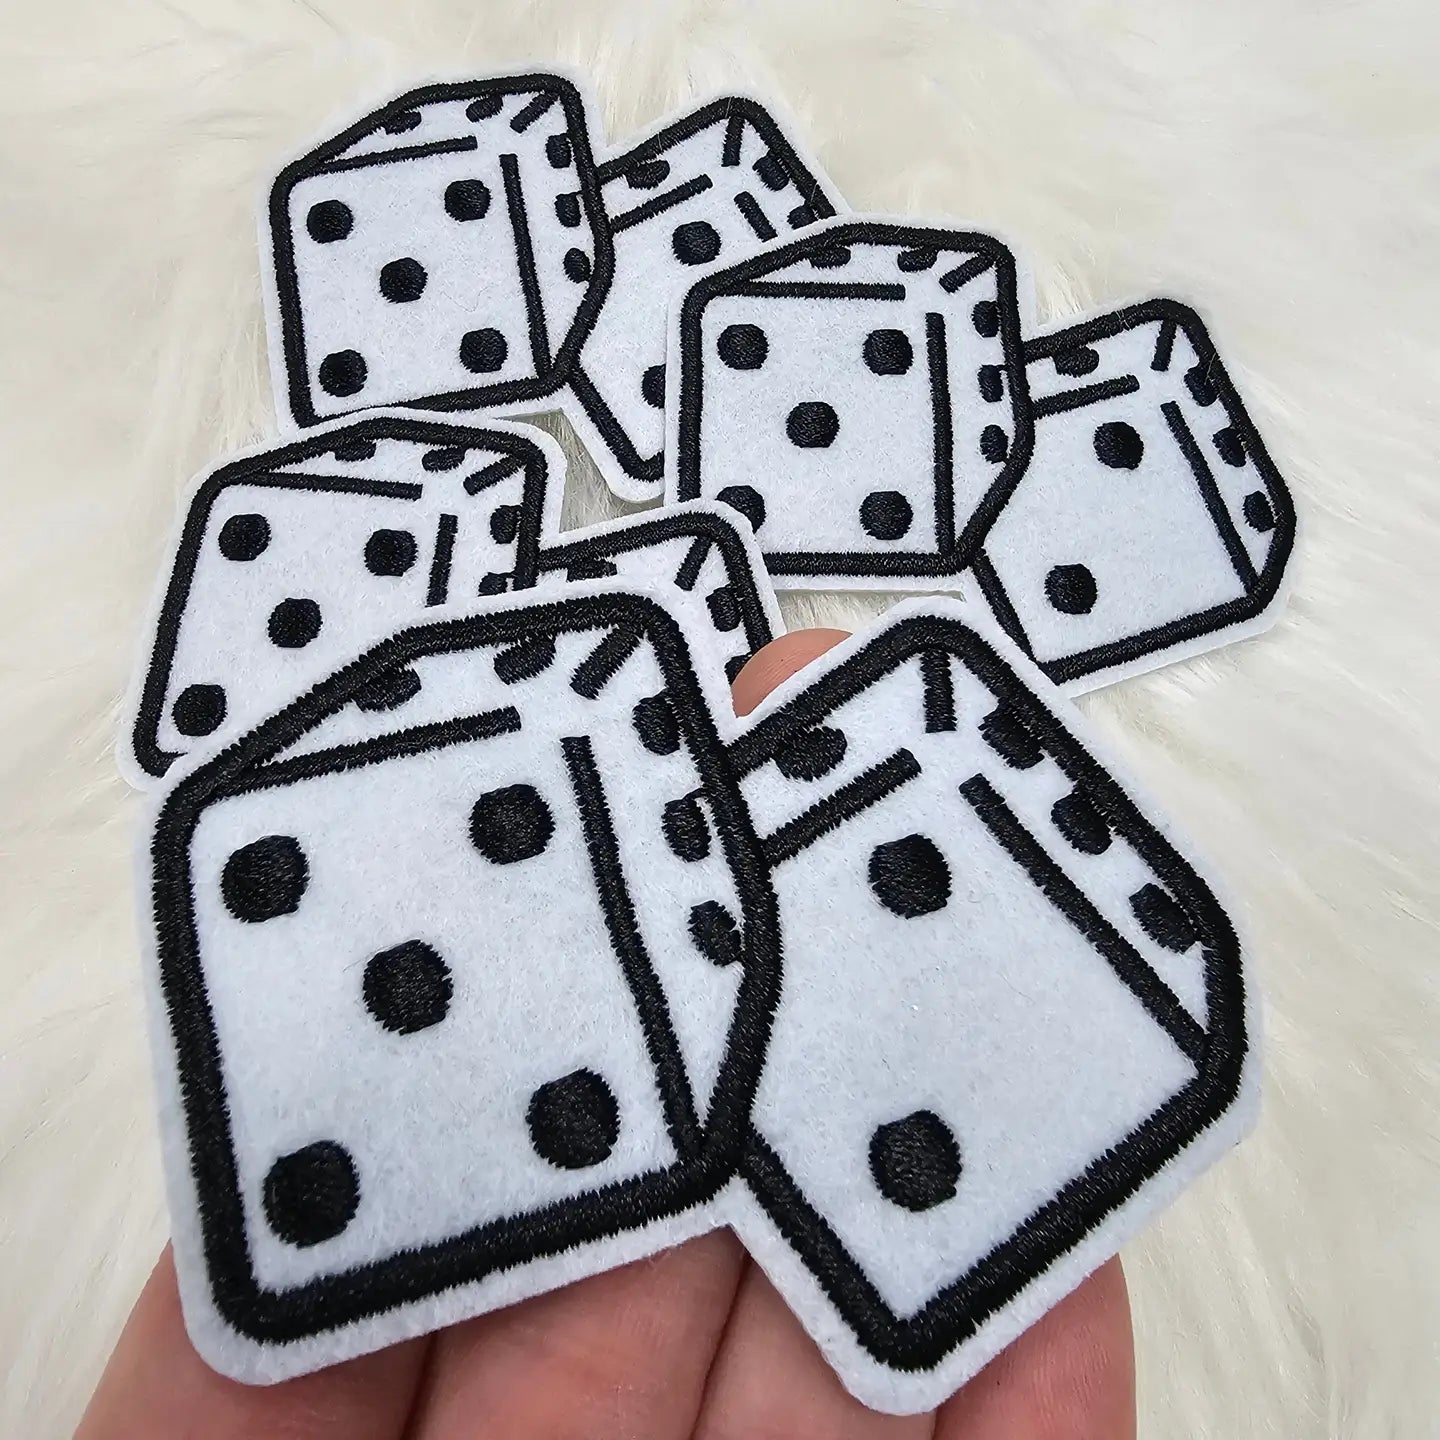 Rolling Dice Patch-Accessories-Deadwood South Boutique & Company-Deadwood South Boutique, Women's Fashion Boutique in Henderson, TX